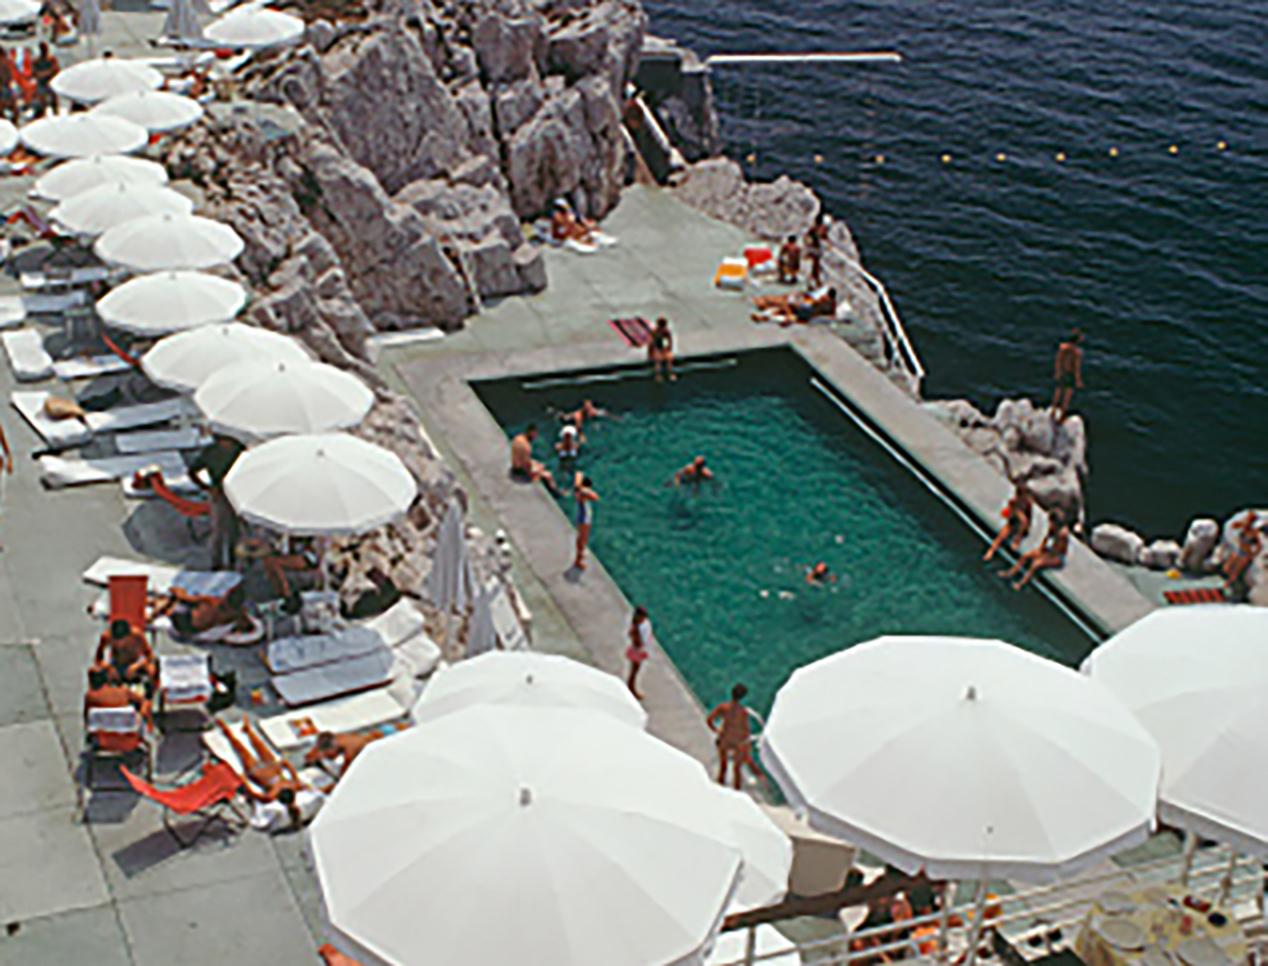 Bathers enjoy the sun by the pool at the Hôtel du Cap Eden-Roc, Antibes, France, 1969. Aarons' iconic photograph depicts the legendary hotel made famous by Fitzgerald's Tender is the Night, the sun-kissed home away from home for titans of literature